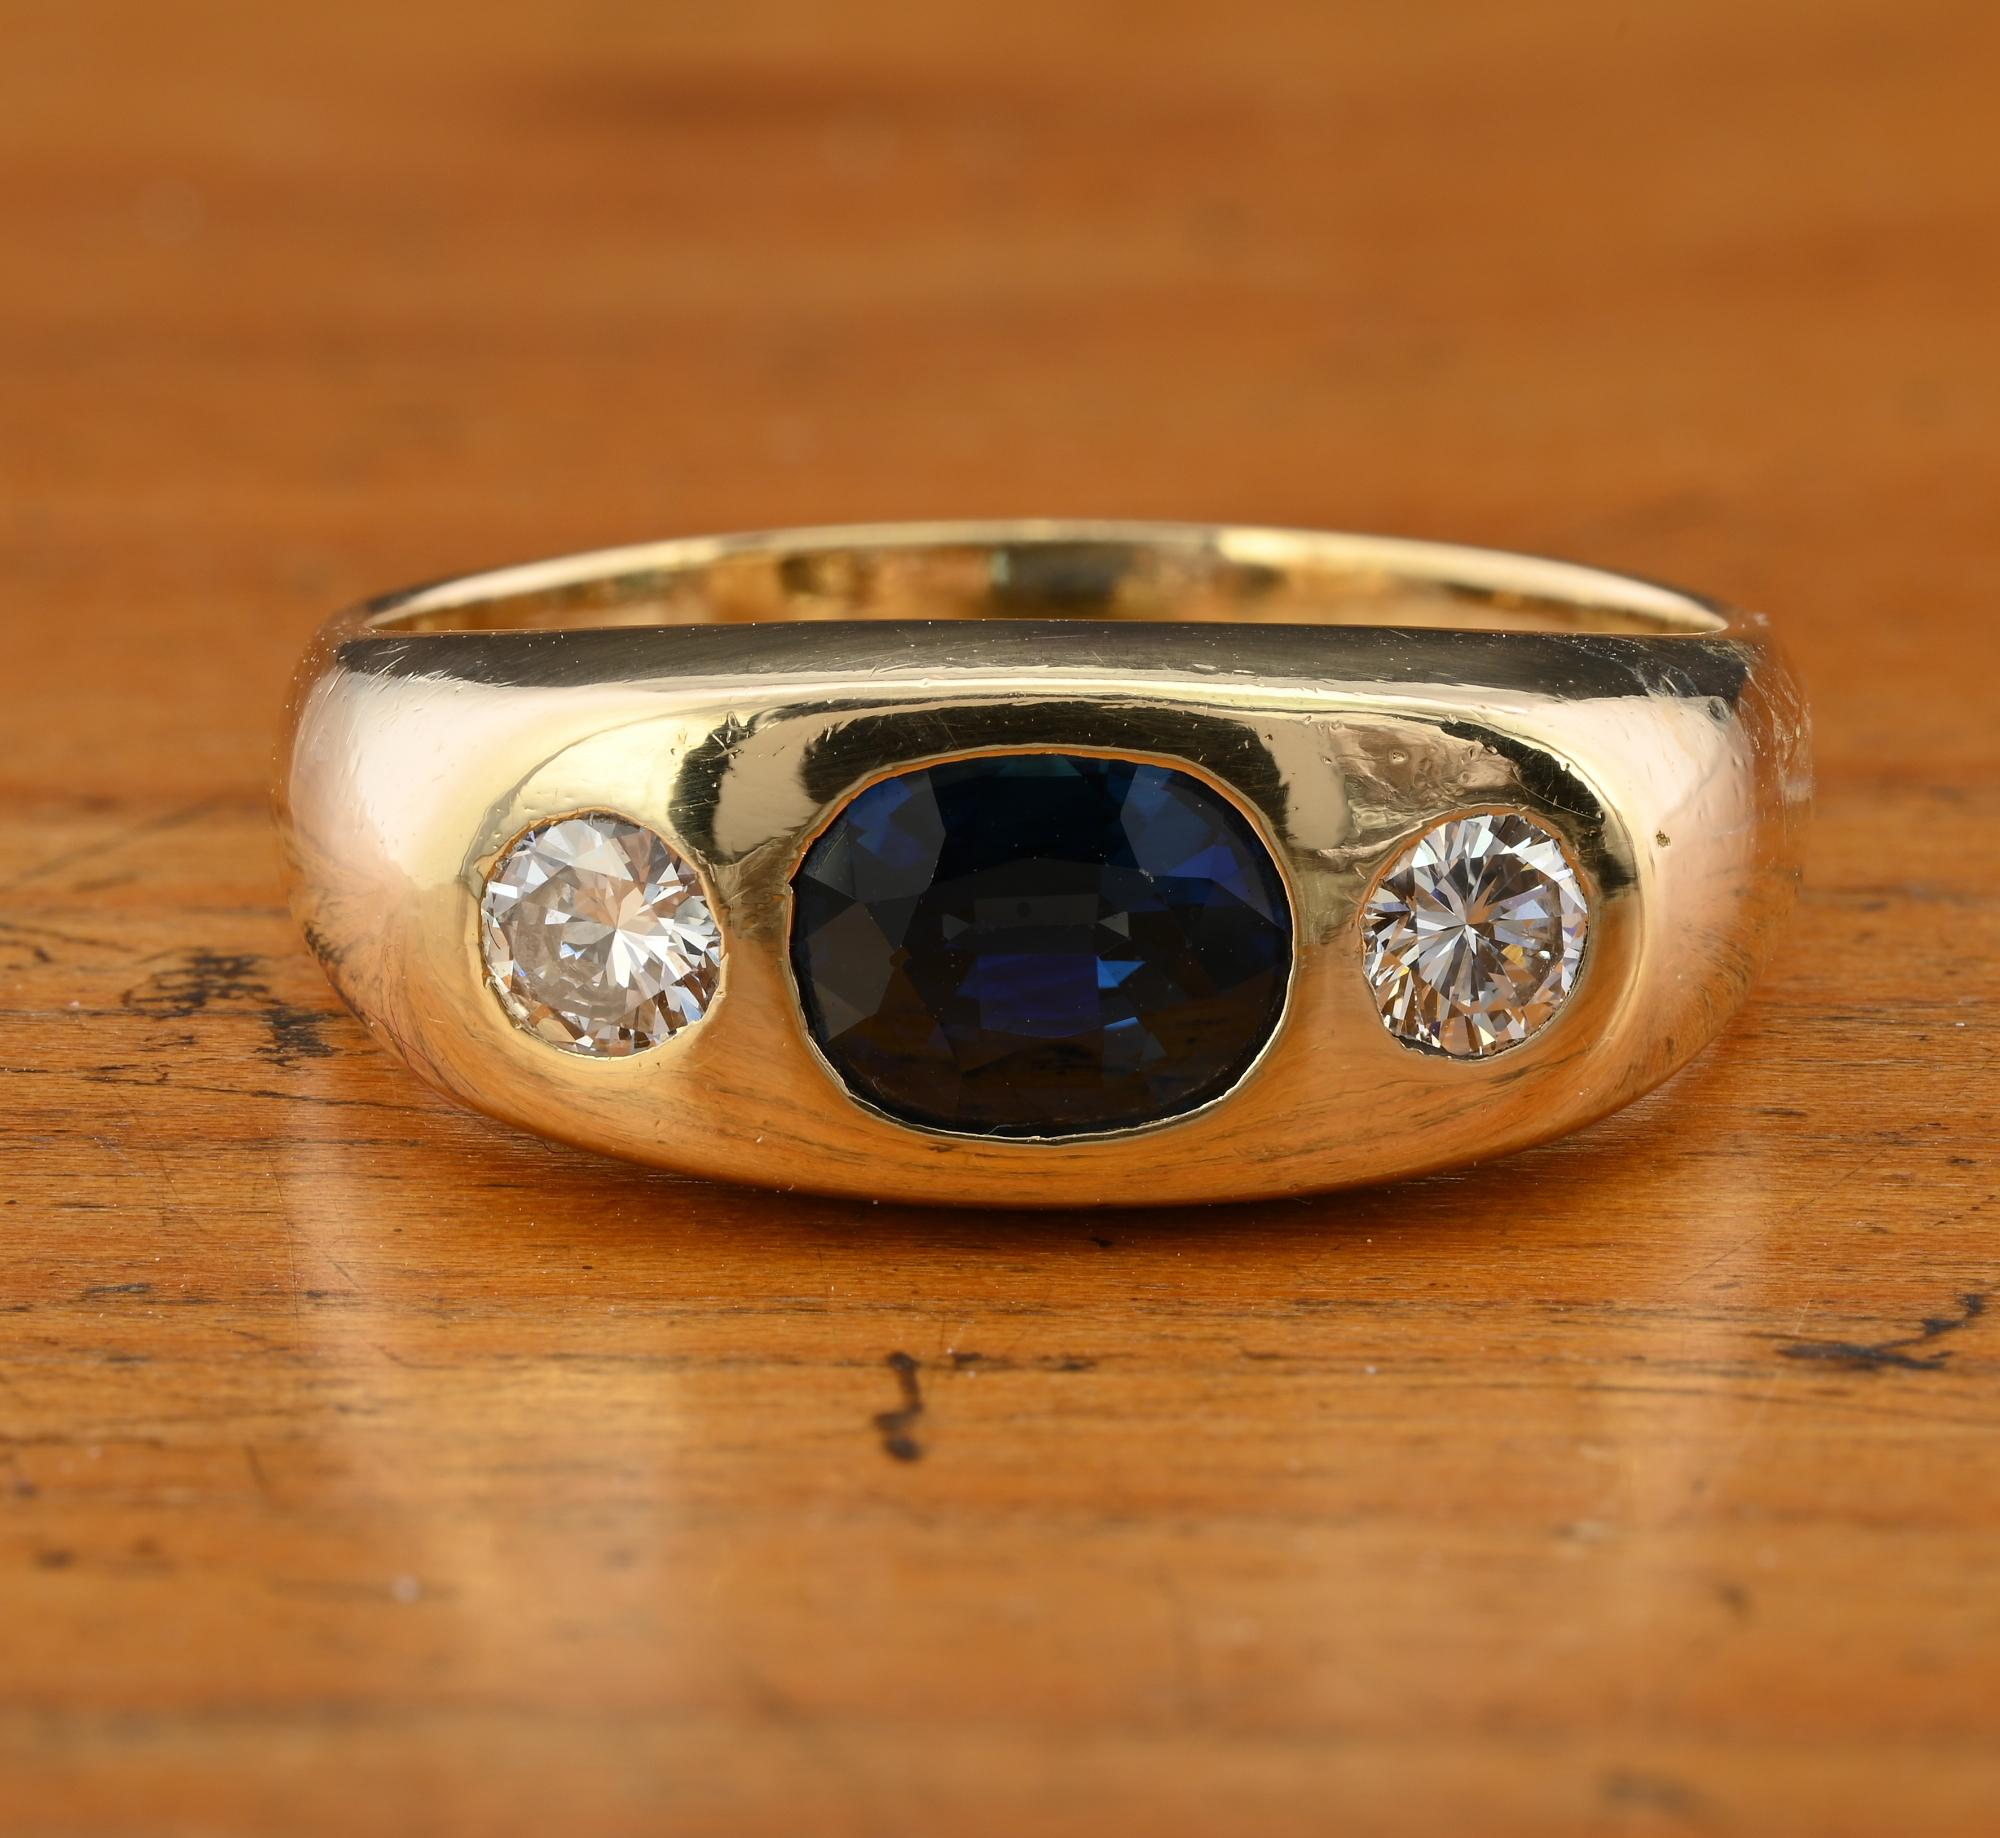 This fabulous Diamond Sapphire three stone Gent ring is 1930 circa
Beautiful designed hand crafted of solid 18 KT gold, Italian marks from the period
Facing up with a classy combination of three stone comprising a natural Sapphire of 1.20 Ct (7.2 x